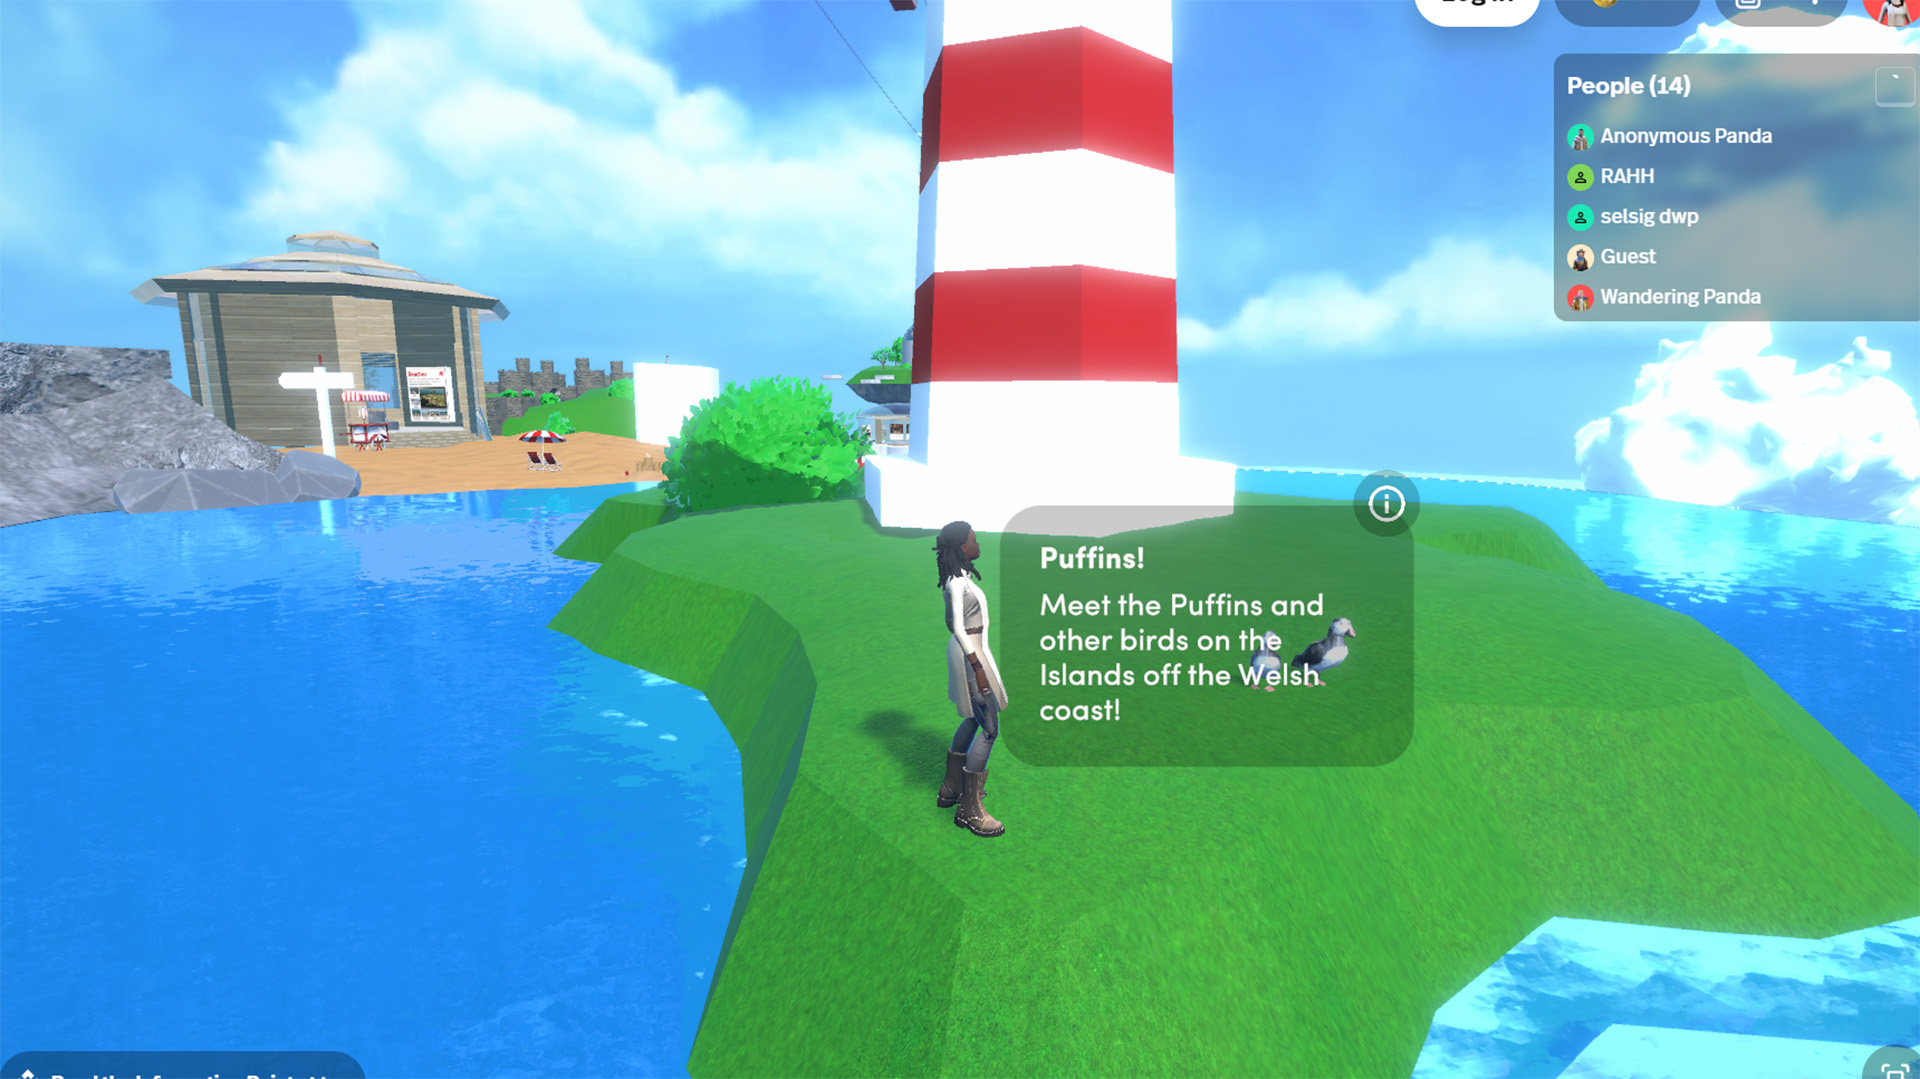 Screenshot from Visit Wales' metaverse project